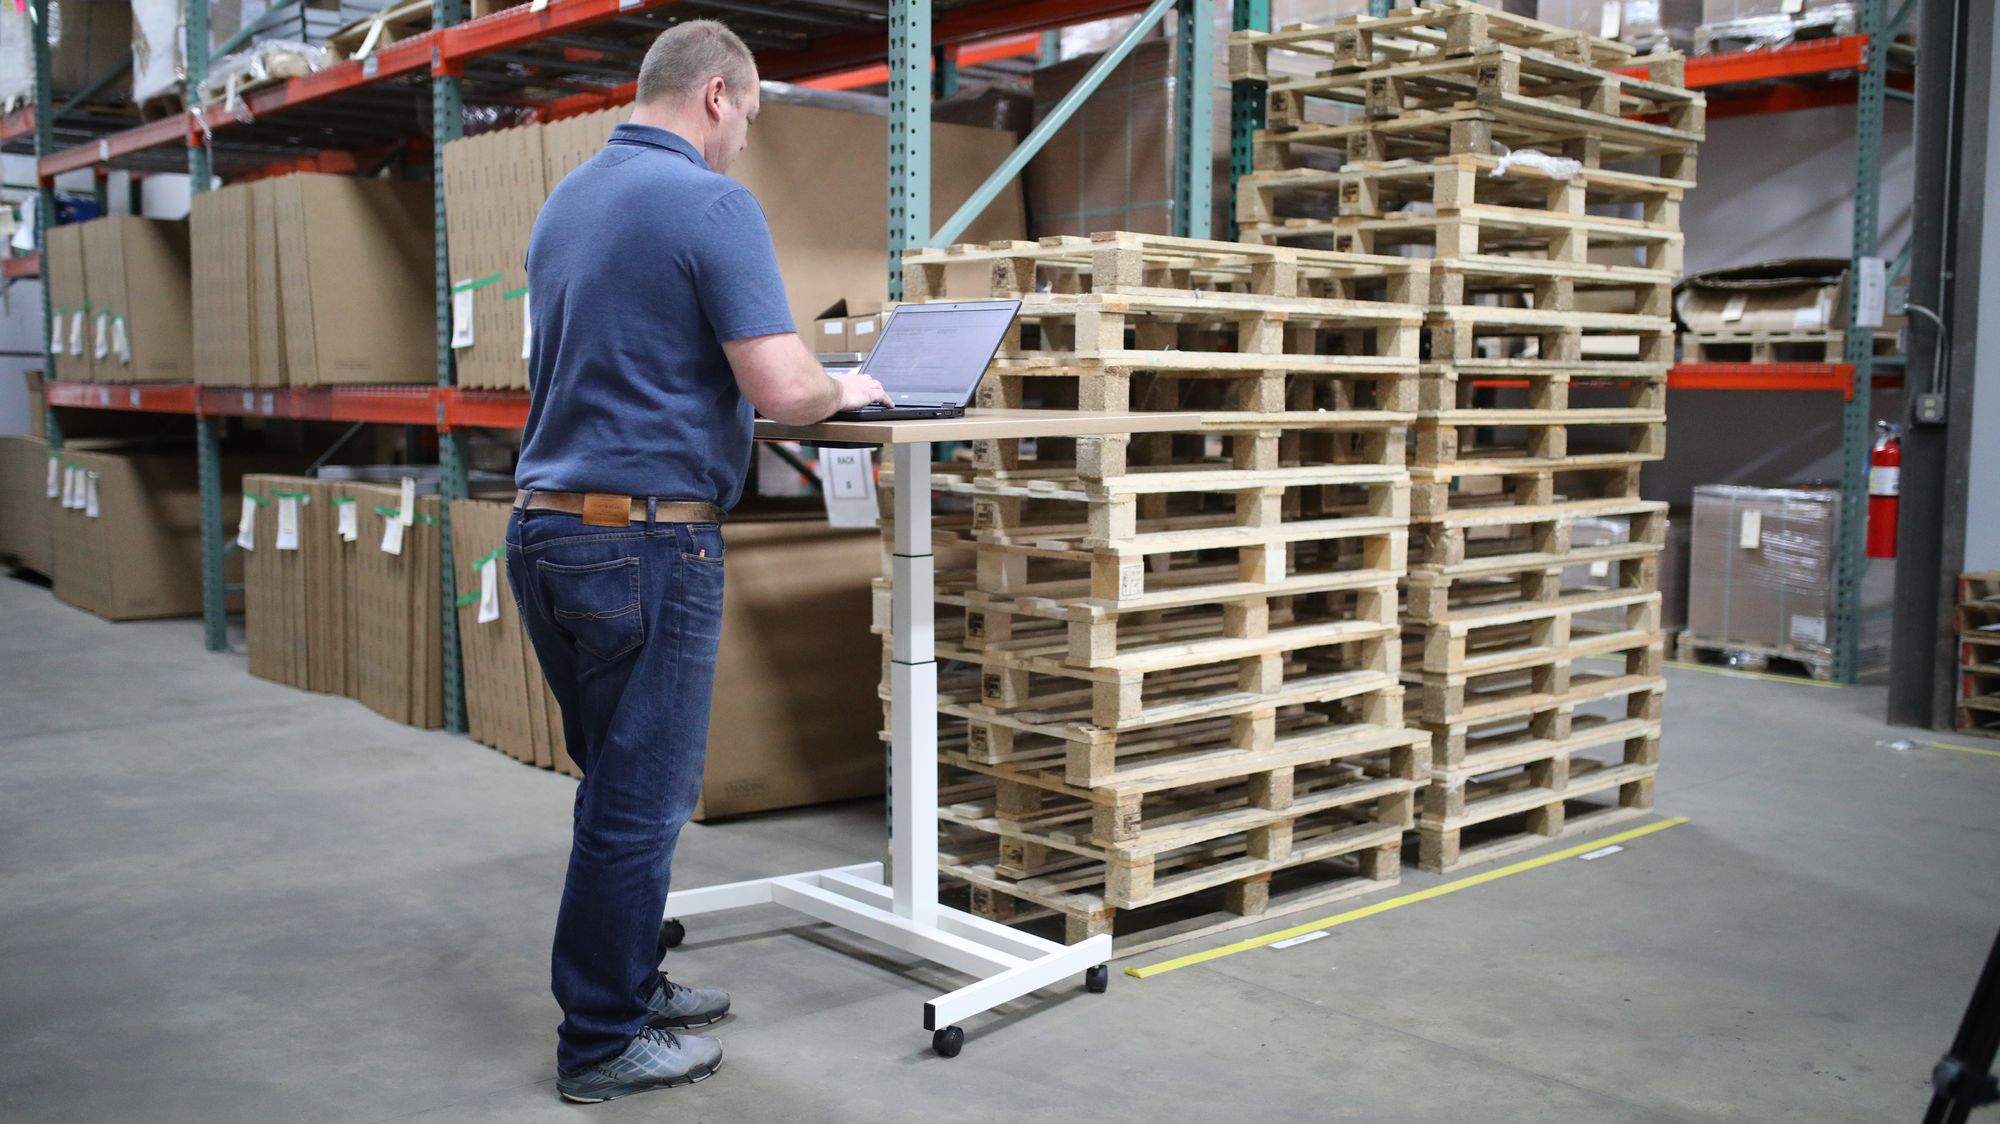 Your eCommerce Fulfillment Solution Should have Inventory Management Features